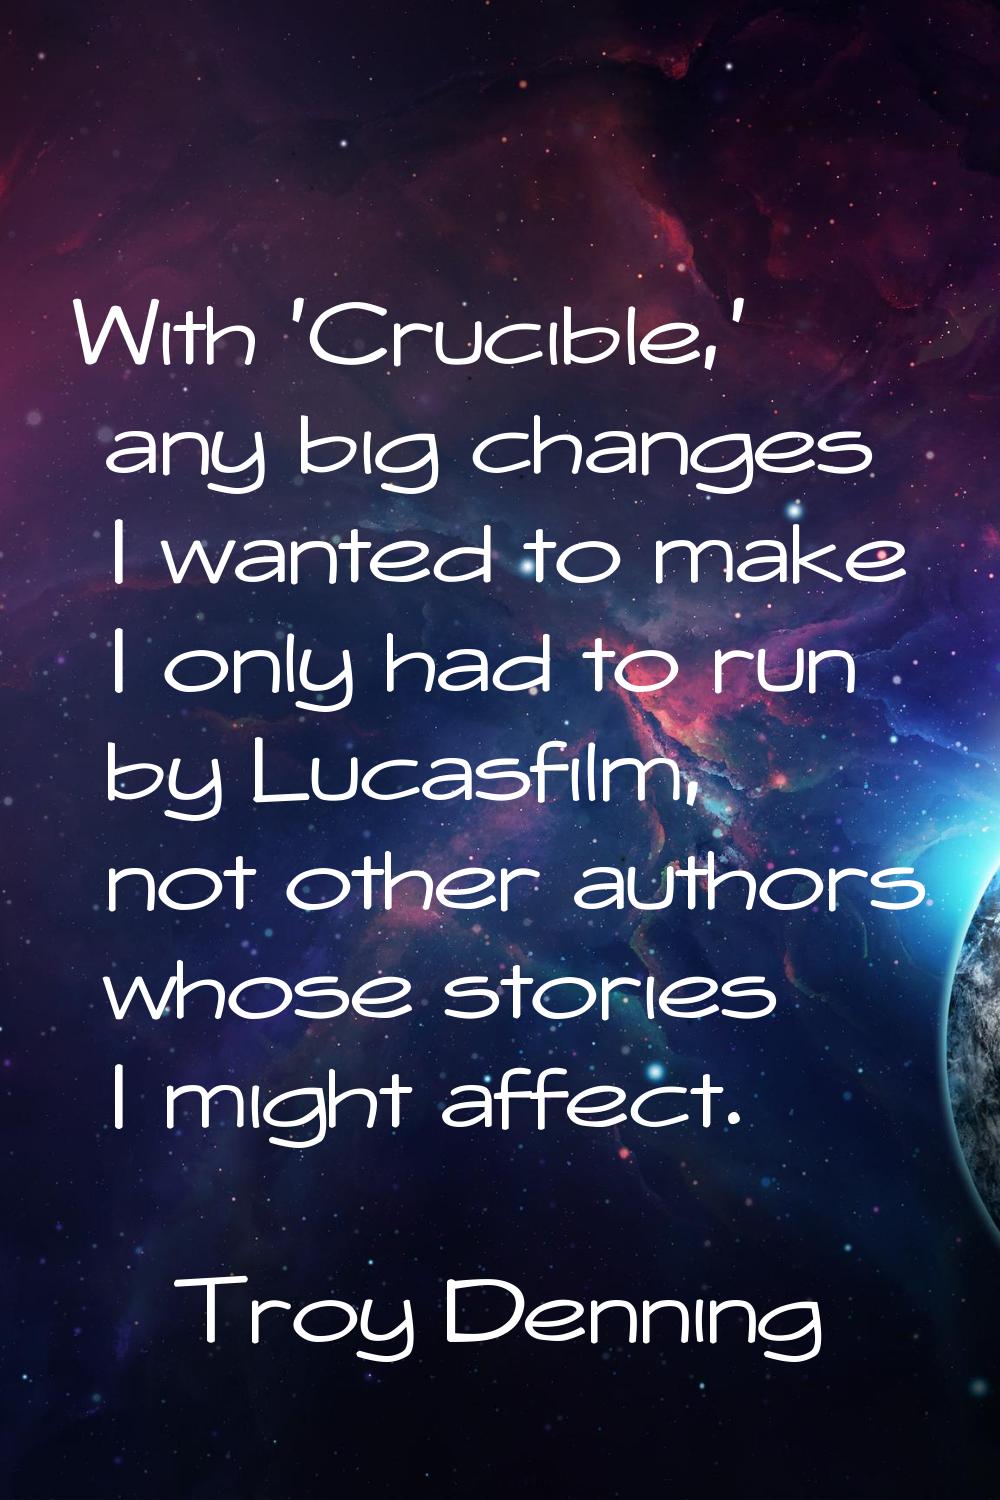 With 'Crucible,' any big changes I wanted to make I only had to run by Lucasfilm, not other authors